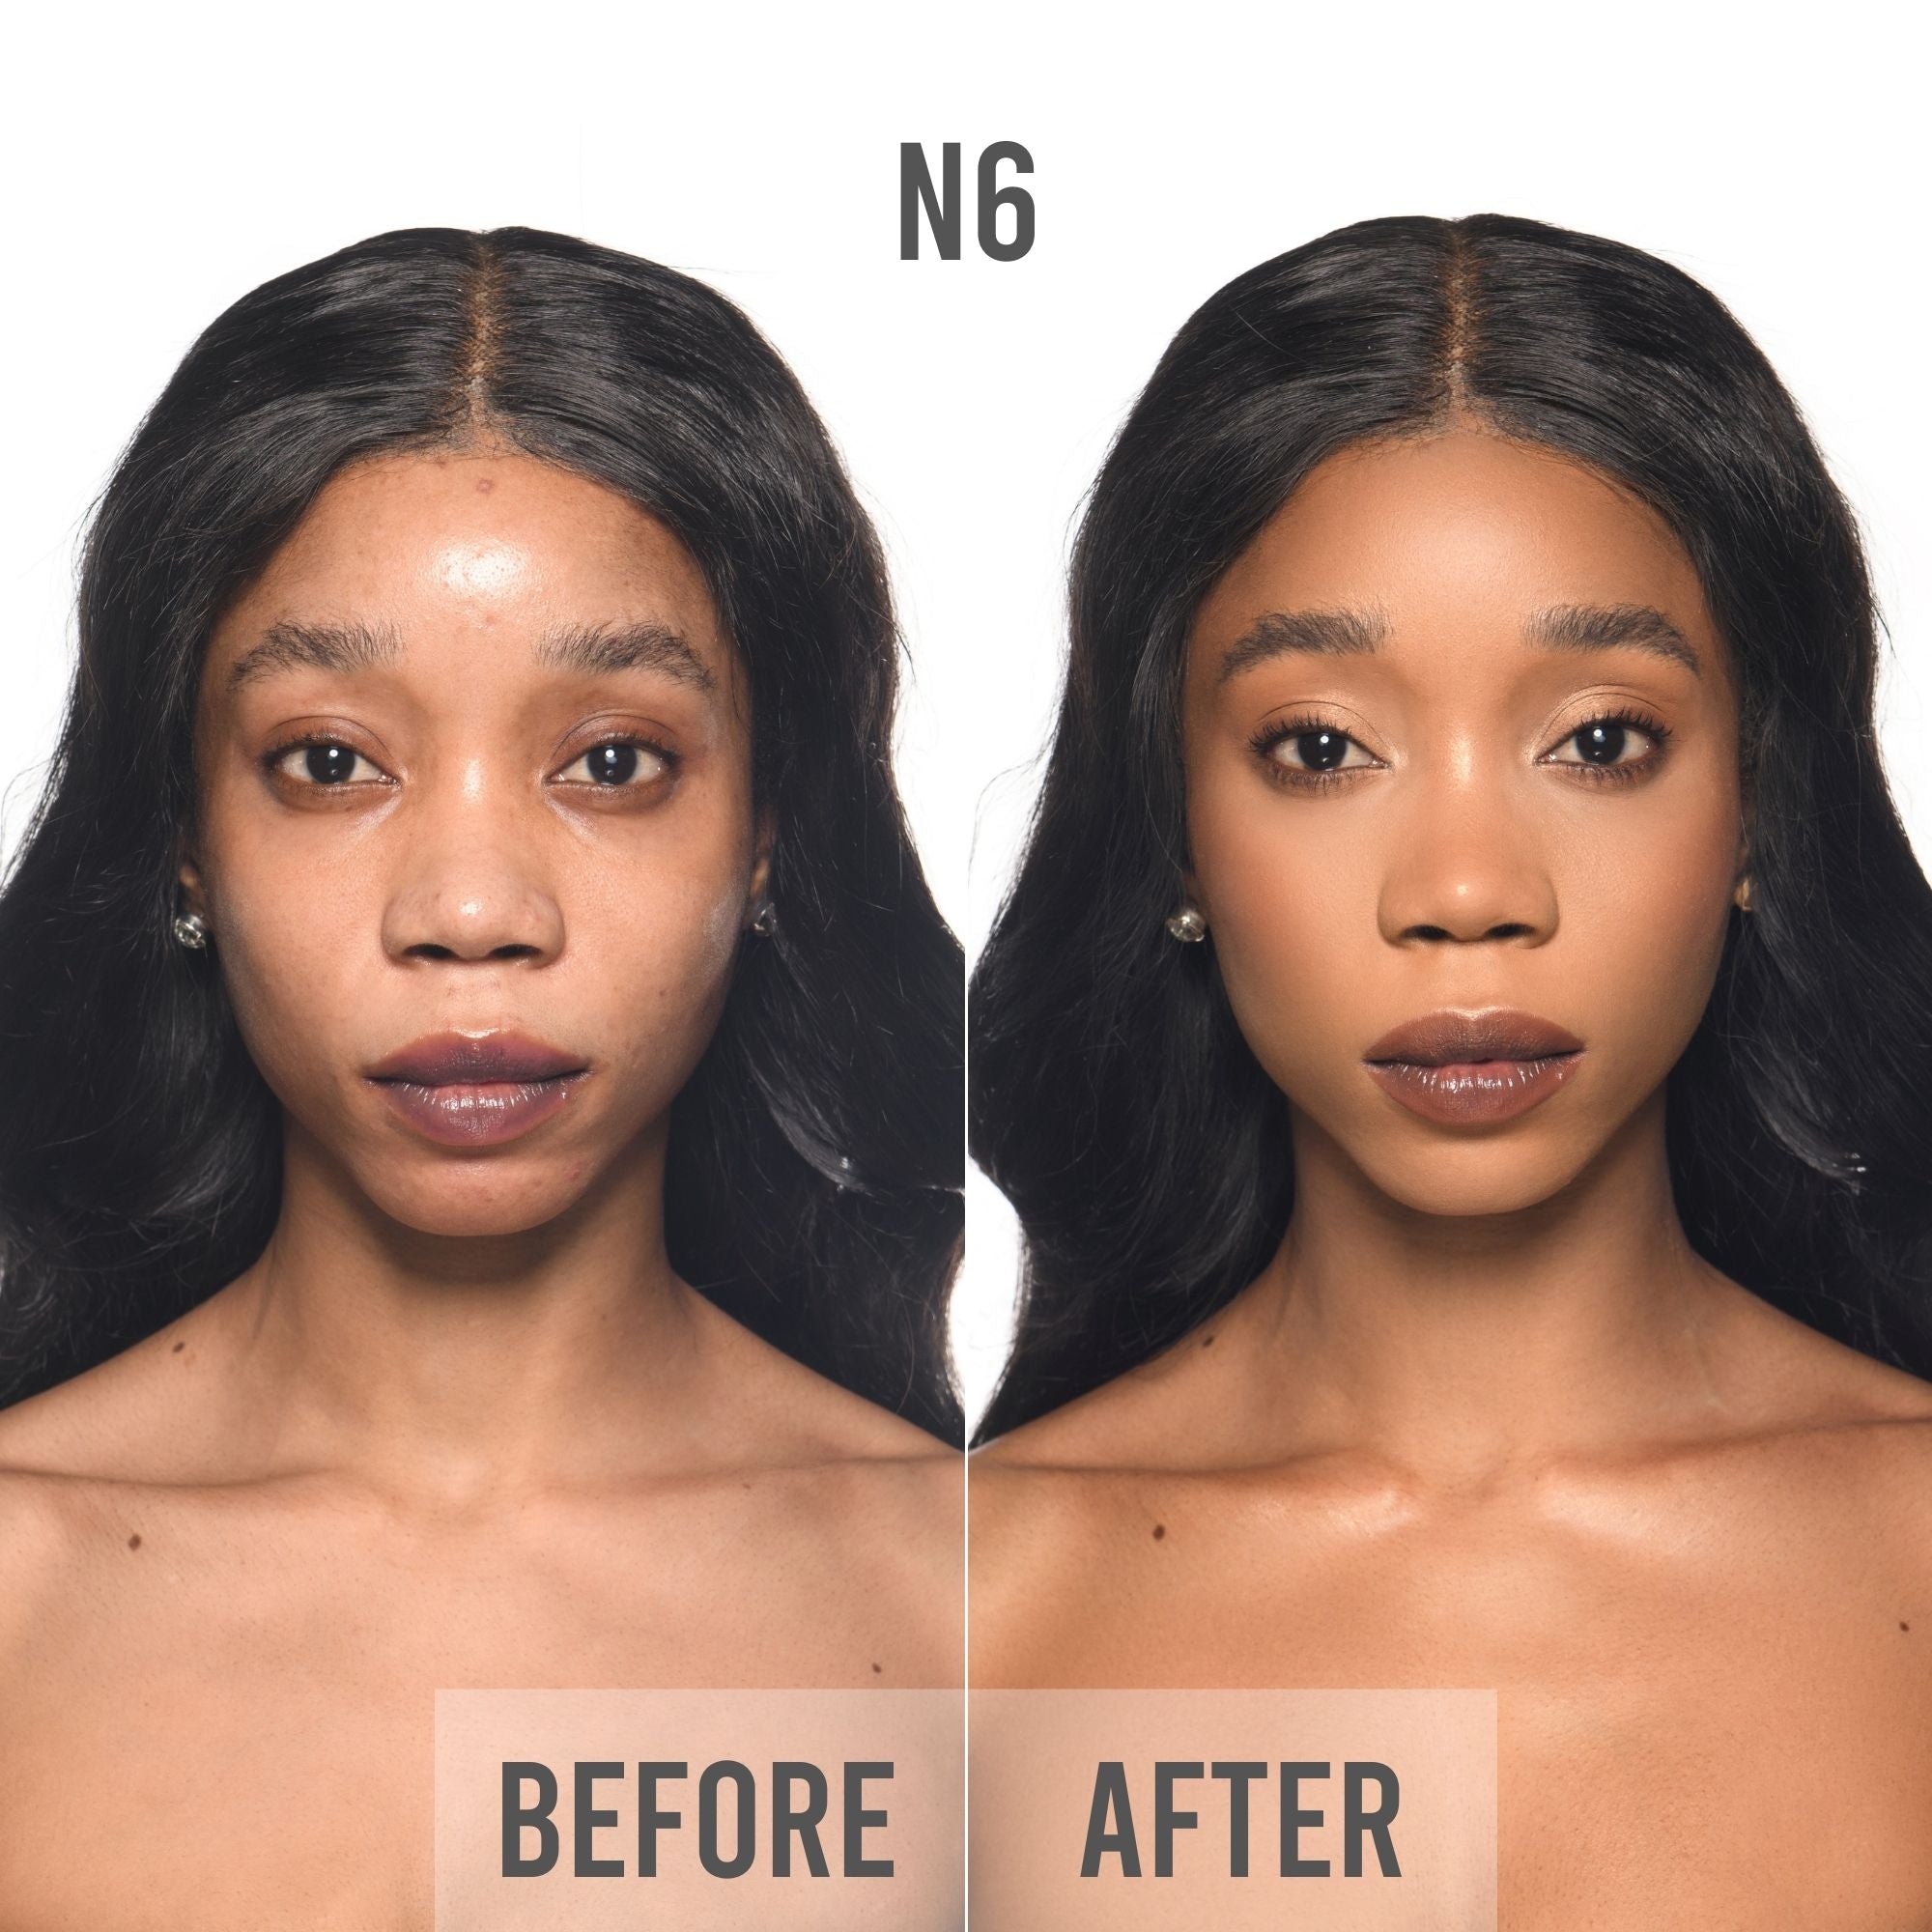 bPerfect CHROMA Cover Matte Foundation, N6 before and after